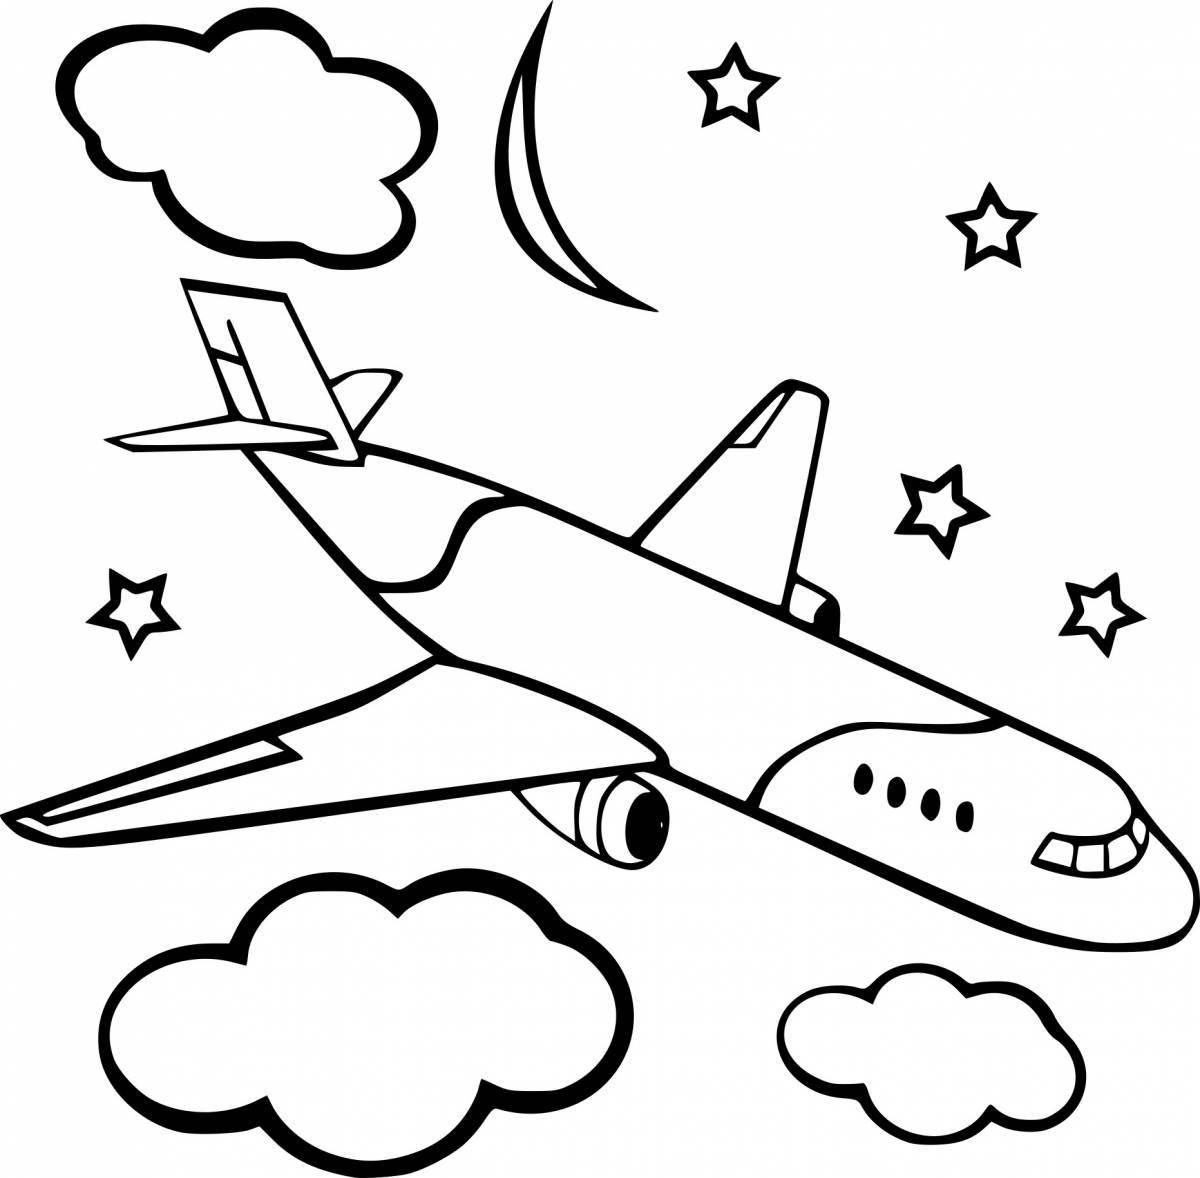 Playful airplane coloring page